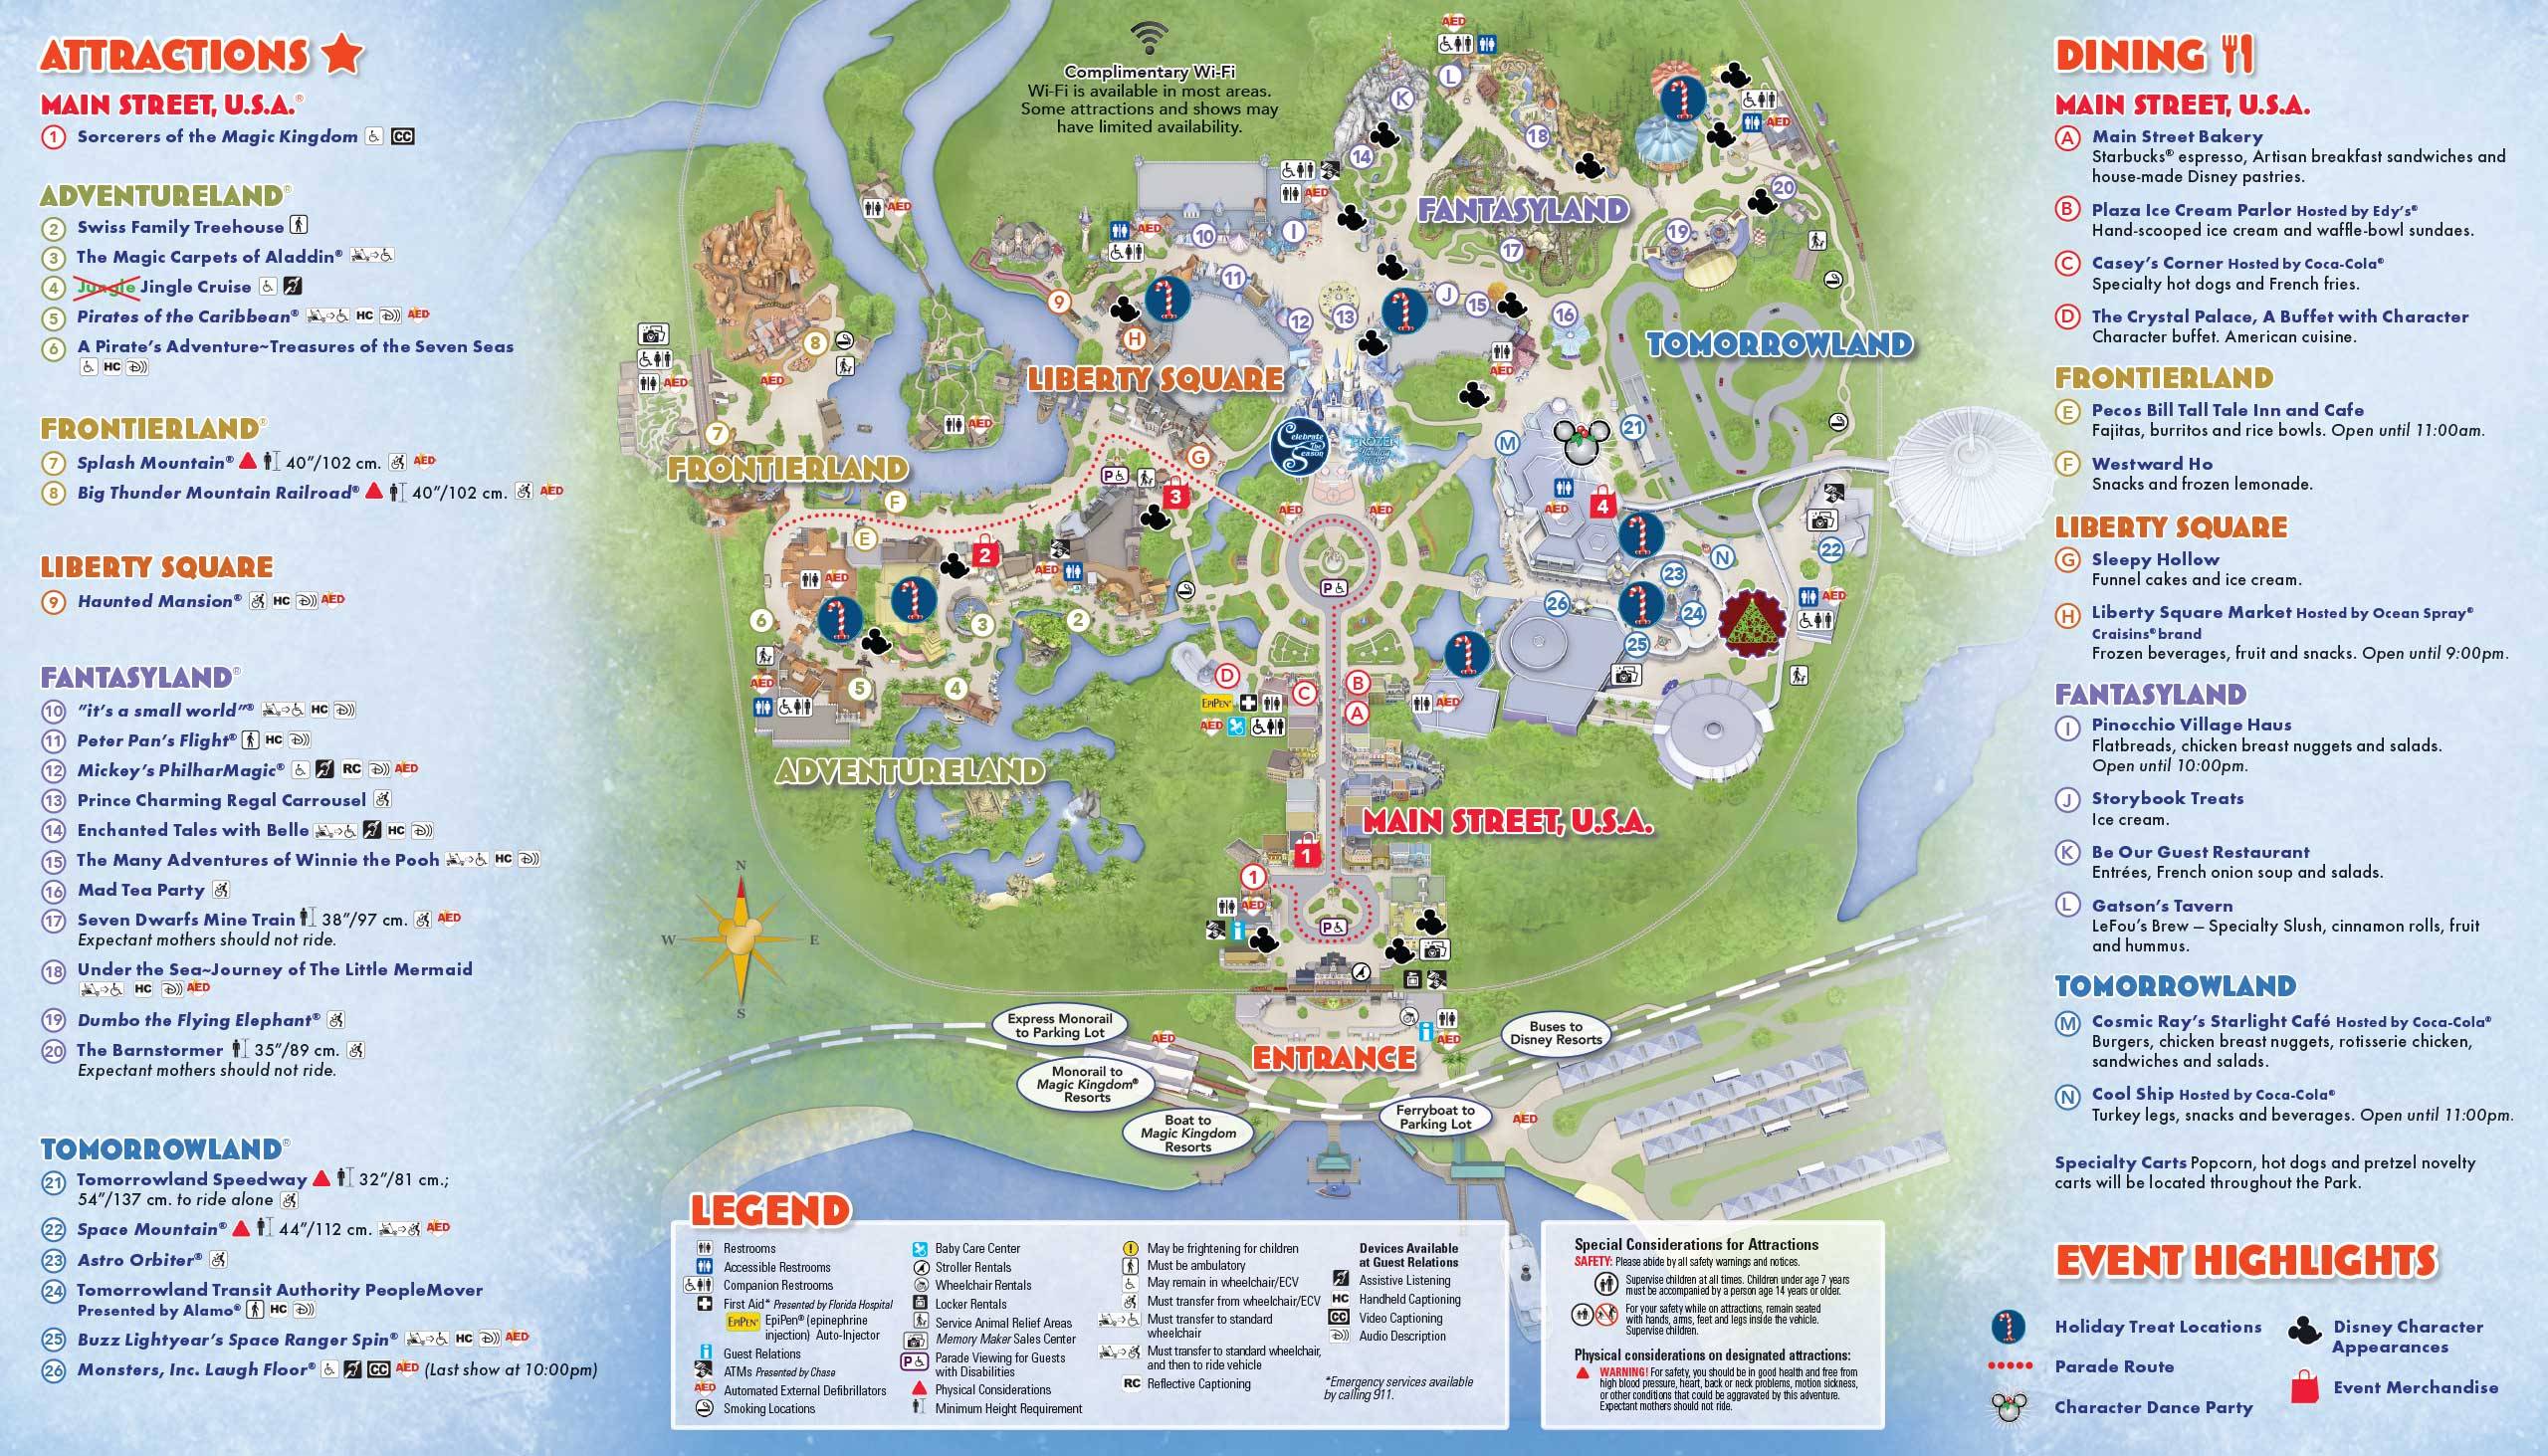 Mickey's Very Merry Christmas Party 2015 guide map - Back